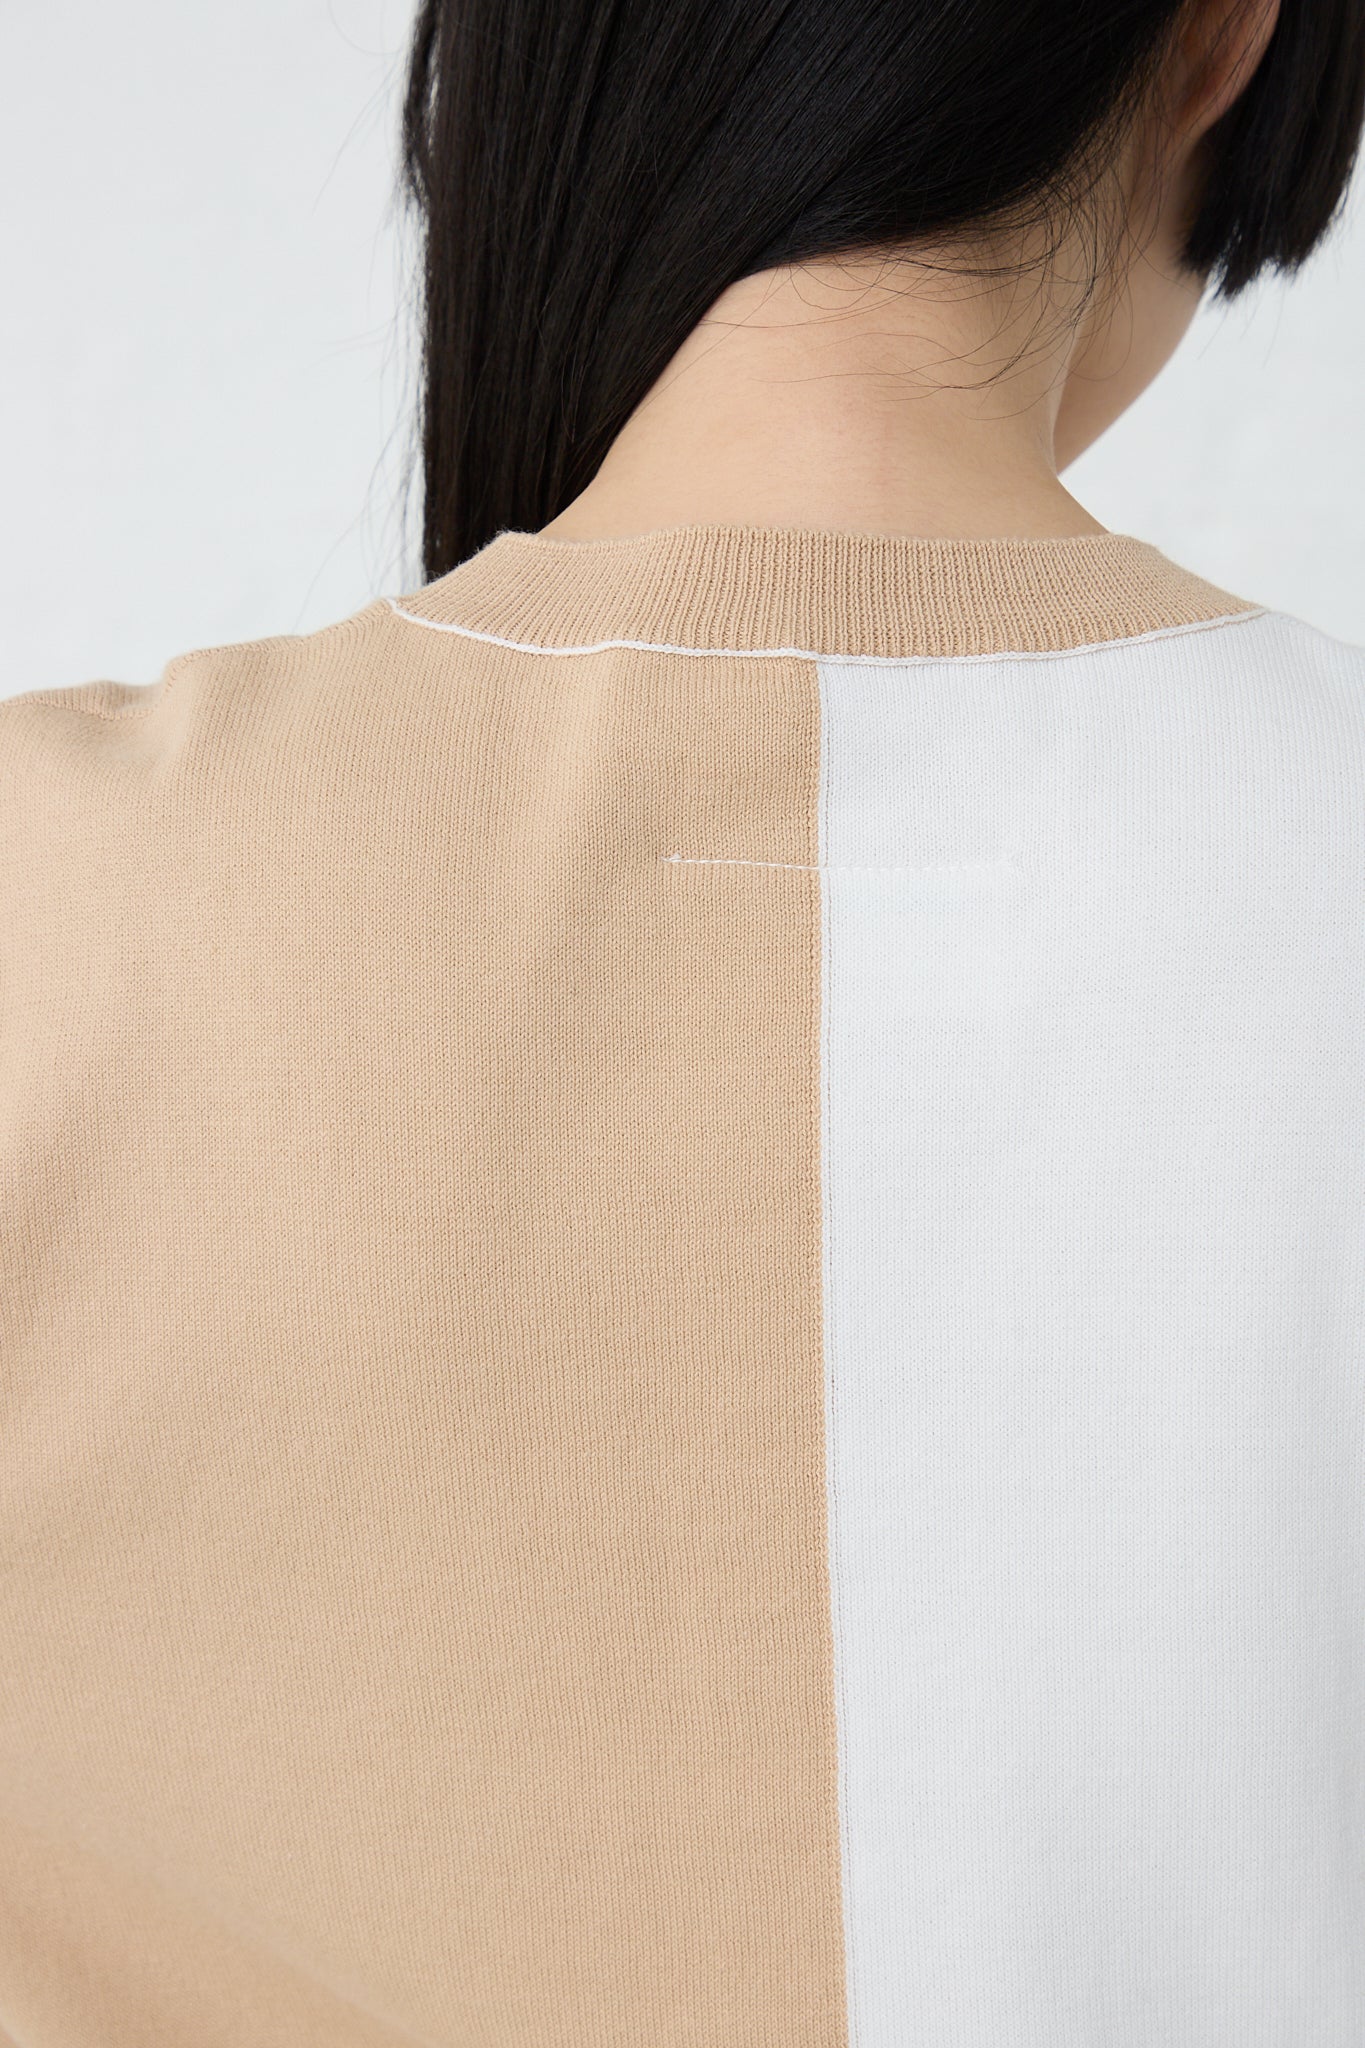 The back view of a woman wearing a relaxed fit, bi-color Crewneck in Beige Off White cotton sweater with a crew neck by MM6.